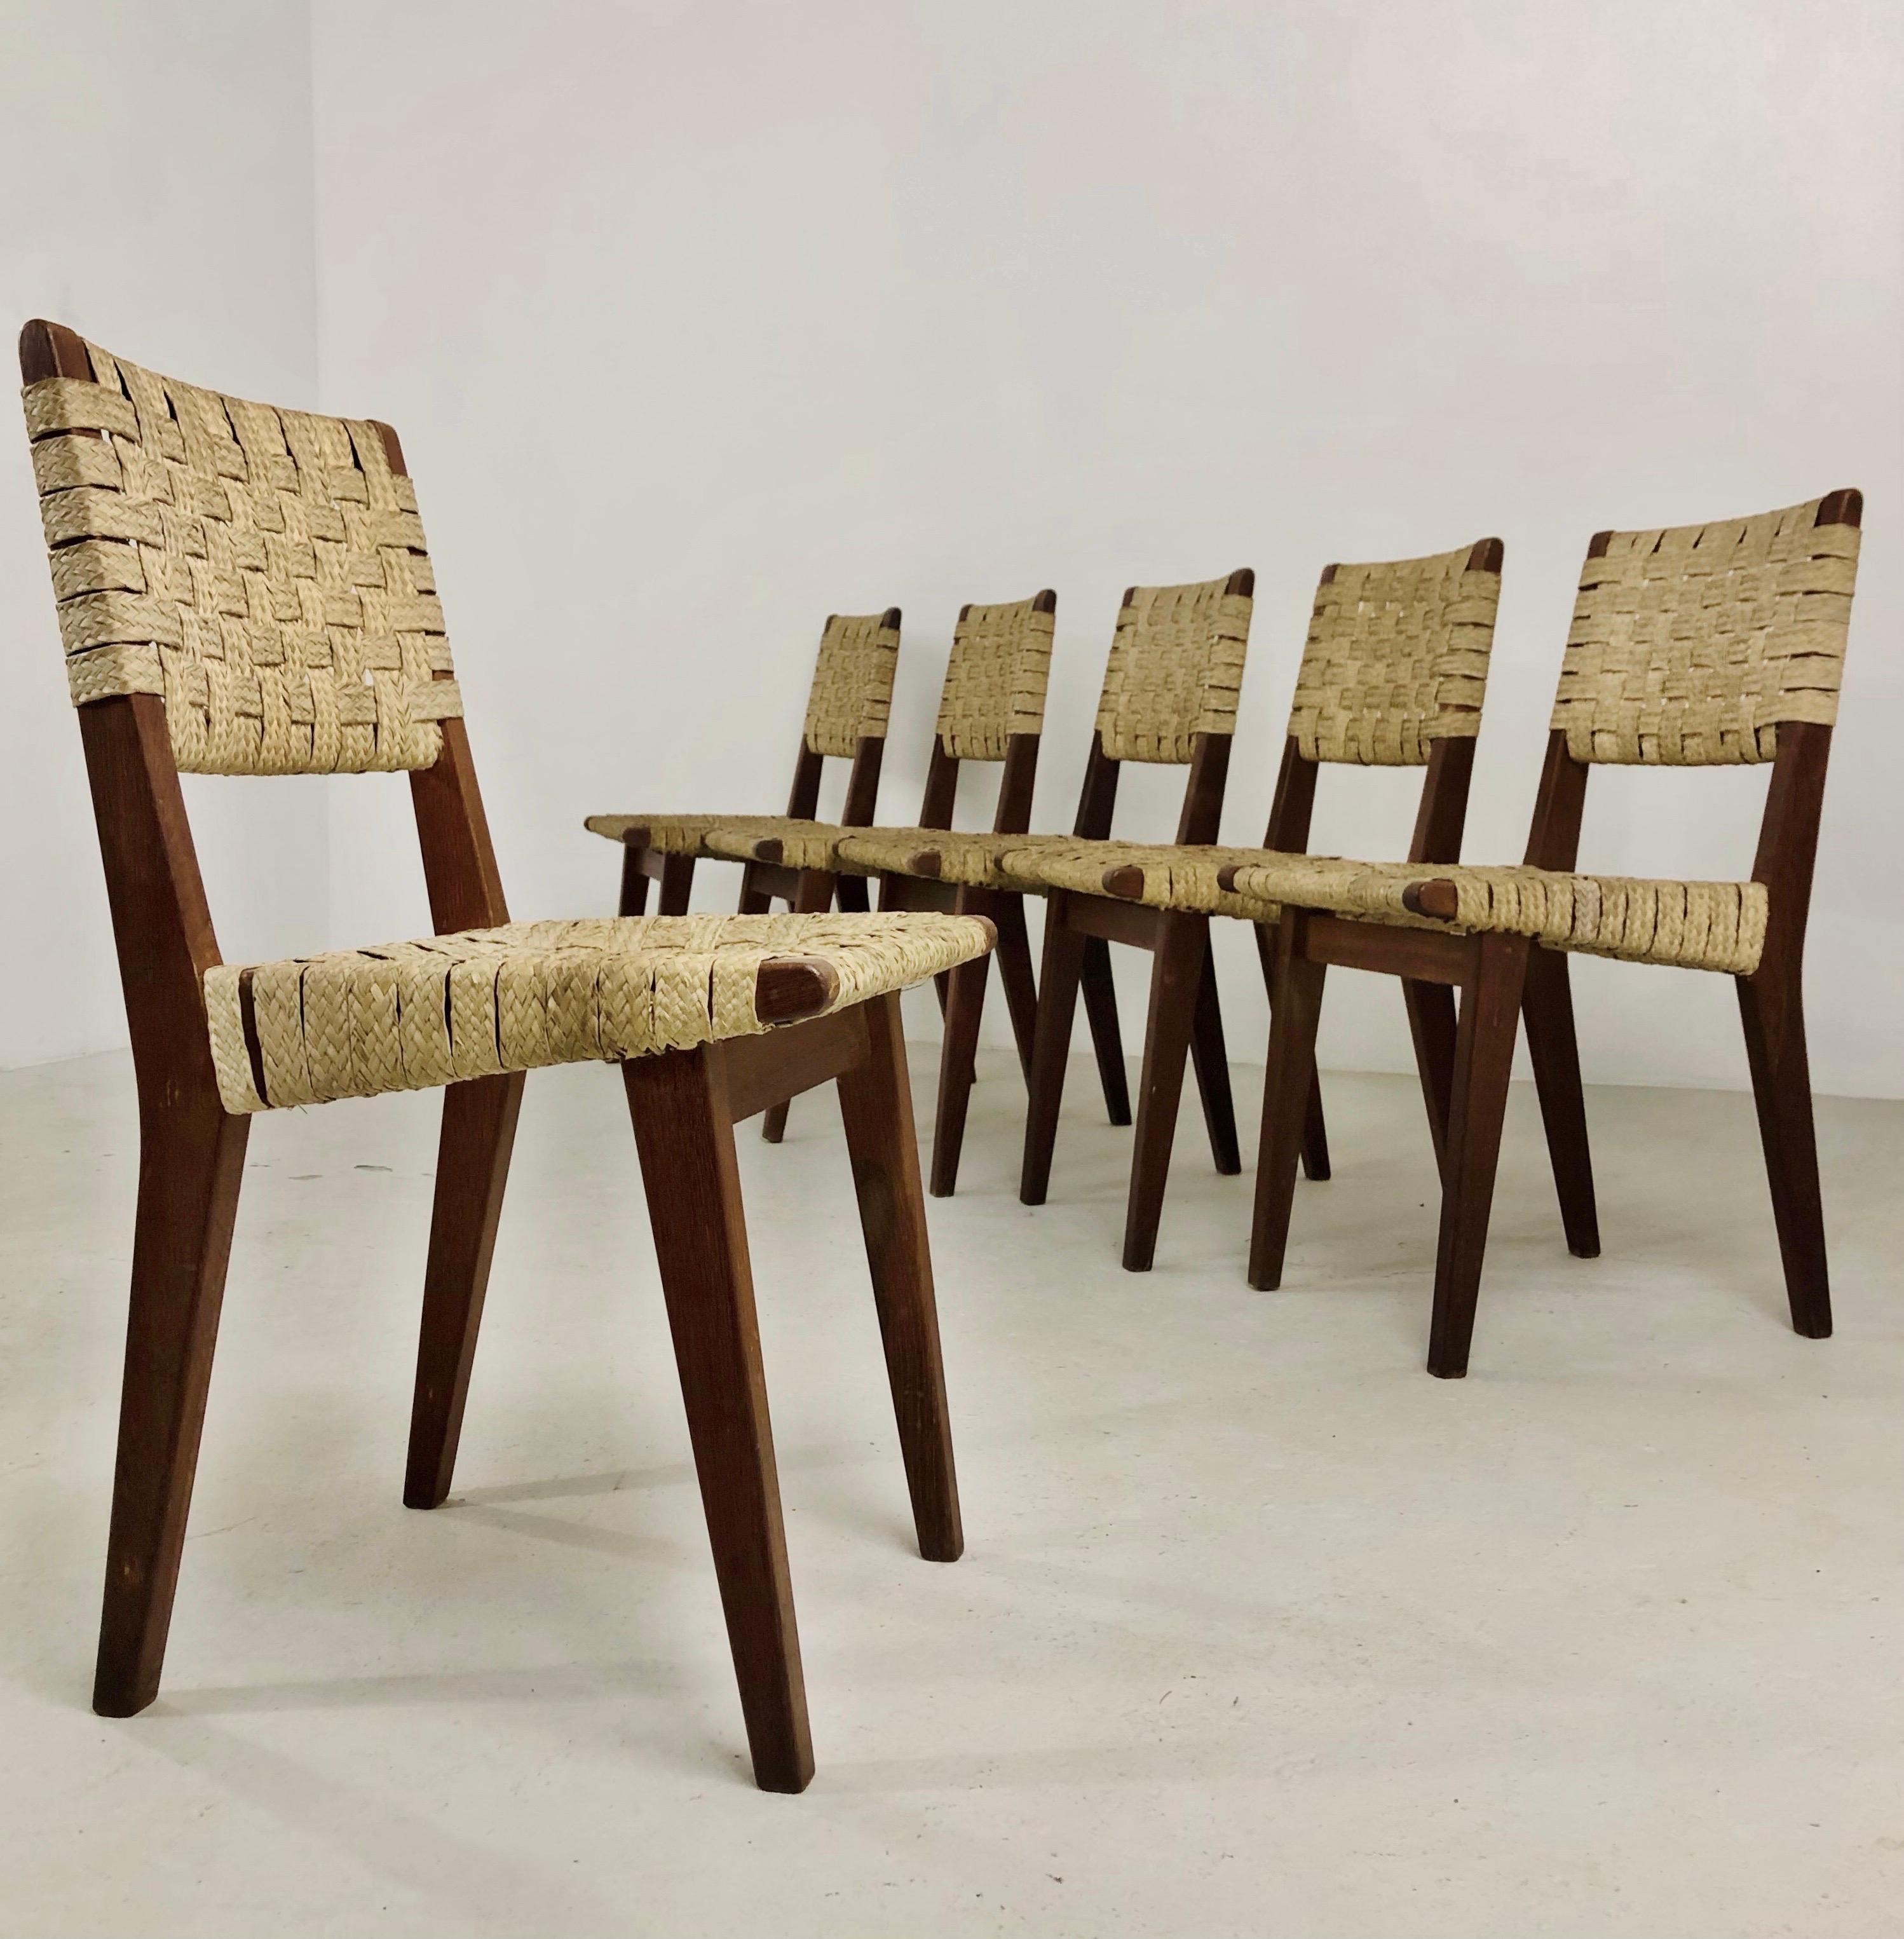 Set of six chairs designed by Jens Risom. The oldest model features a solid oak structure and natural reed weaving for both the backrest and seat. The chairs have developed a beautiful patina over time, adding to their aesthetic appeal. Jens Risom